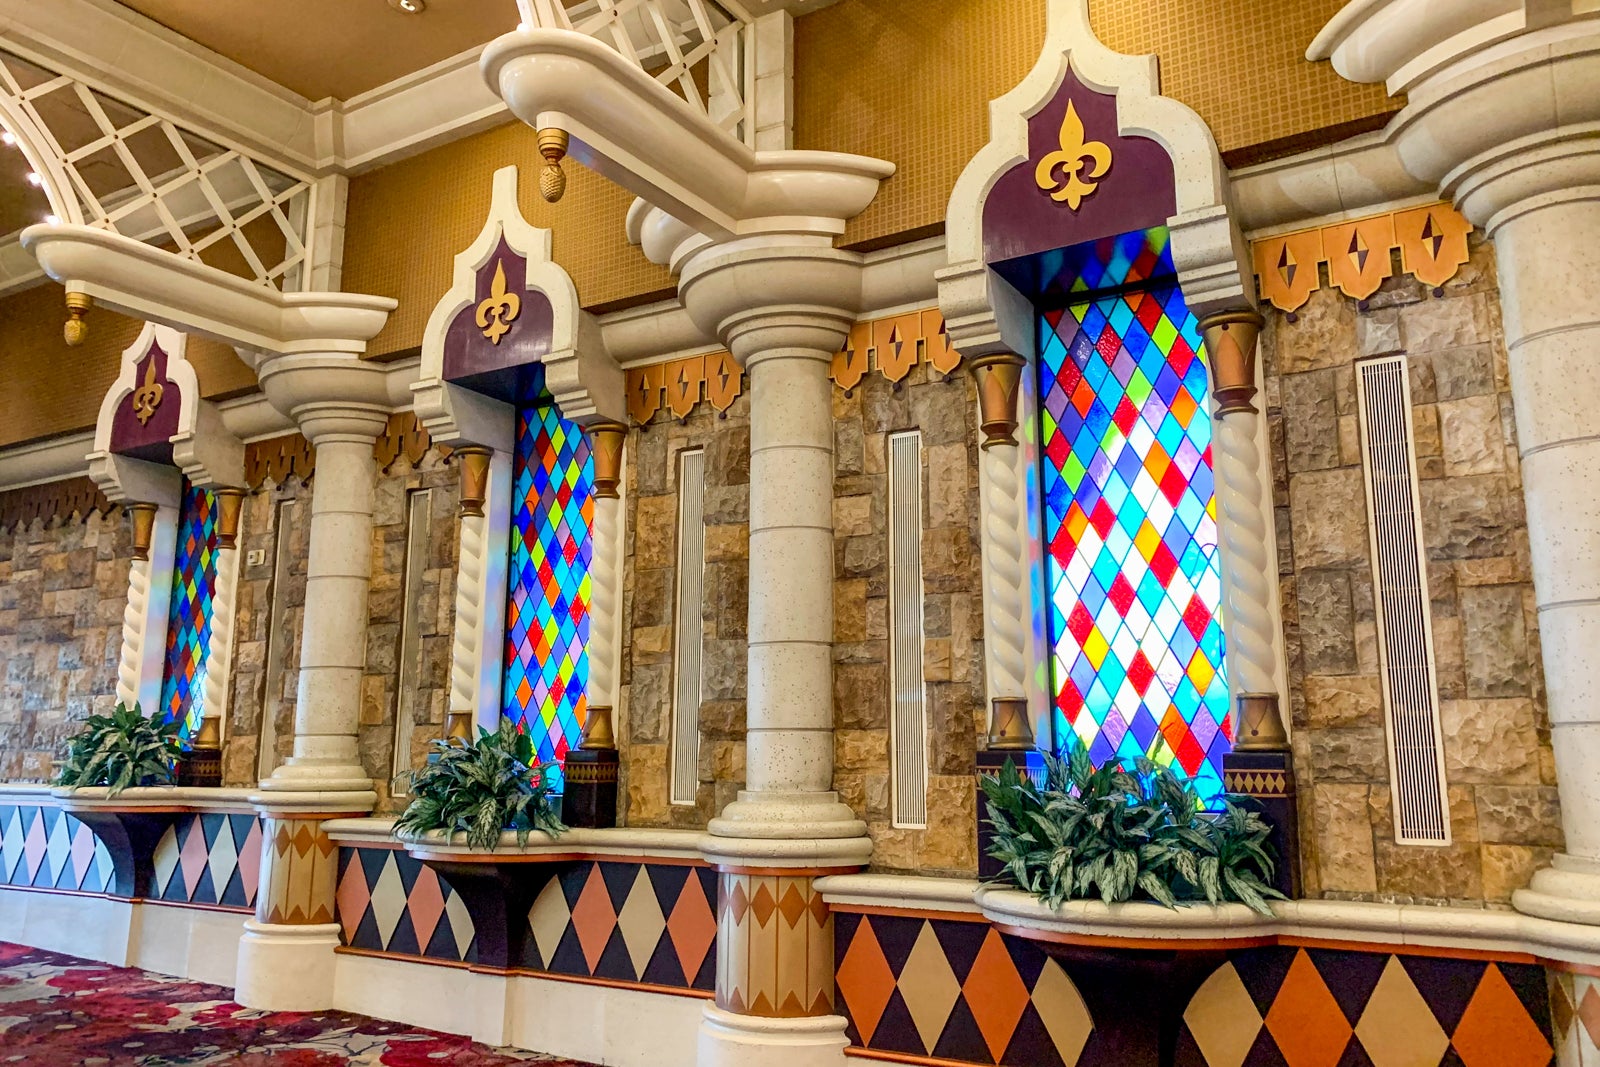 Hardly fit for a knight: Review of Excalibur Hotel and Casino in